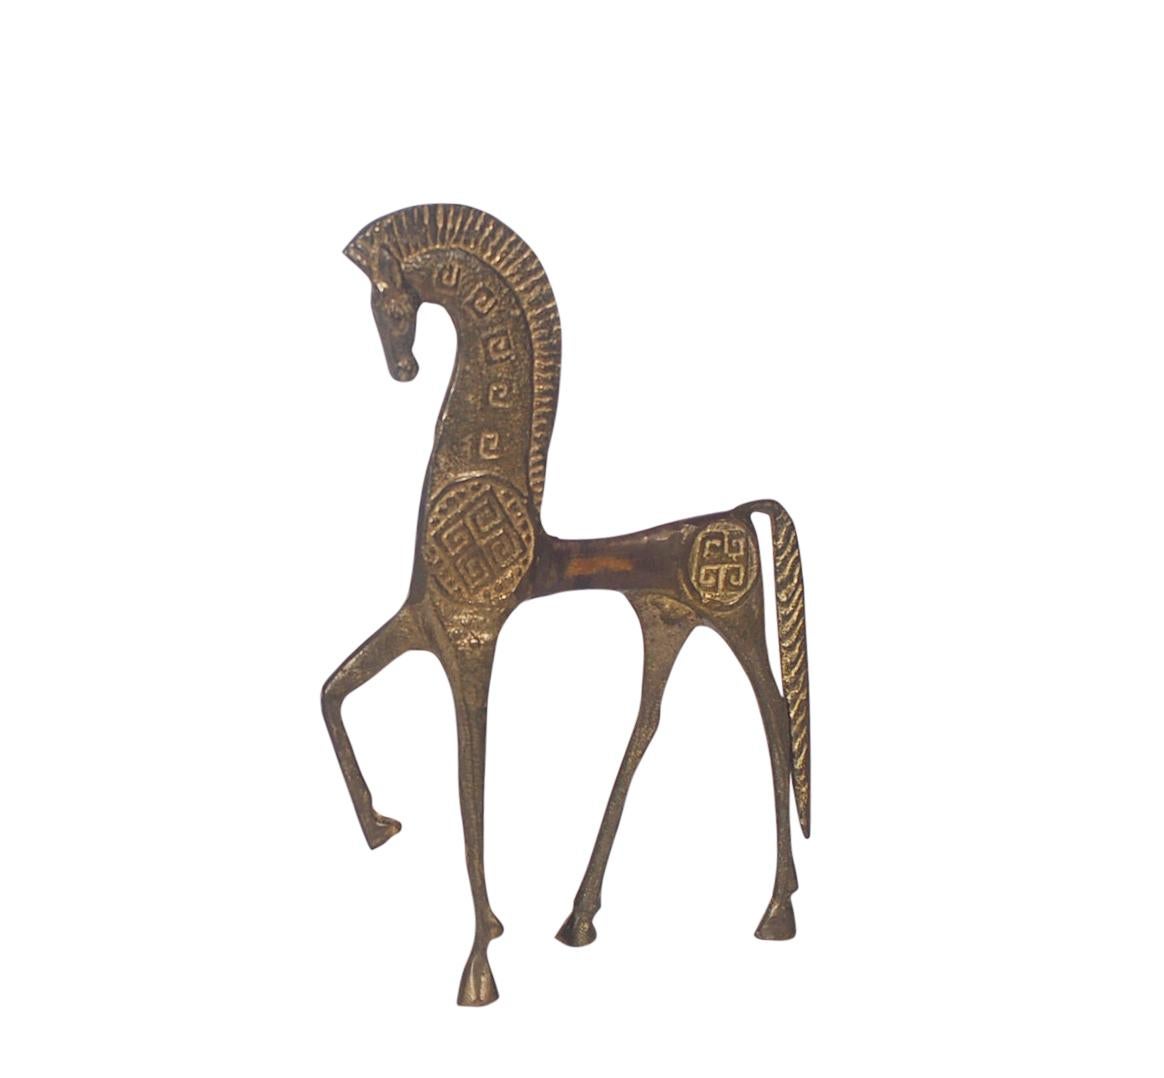 A lovely brass Etruscan horse figurine in the style of Frederic Weinberg. It features a cast brass form with Etruscan print design.